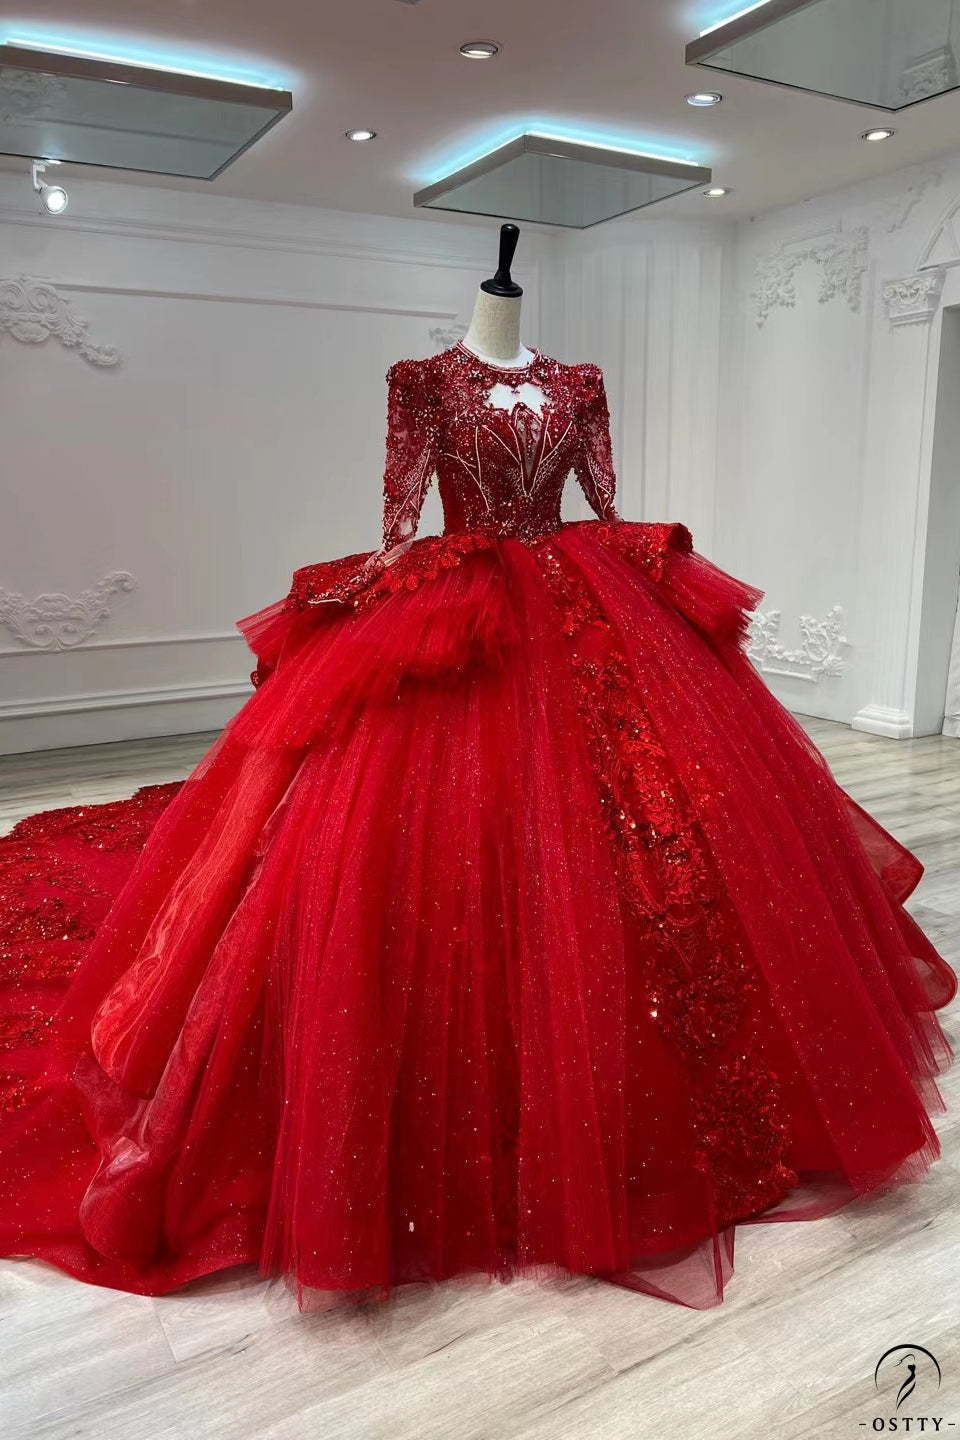 Red Plus Size Ball Gown Puffy Red Quinceanera Dresses With Pearls Lace  Applique And Long Sleeves Elegant Prom And Formal Evening Gresses From  Weddingpalacedress, $155.82 | DHgate.Com